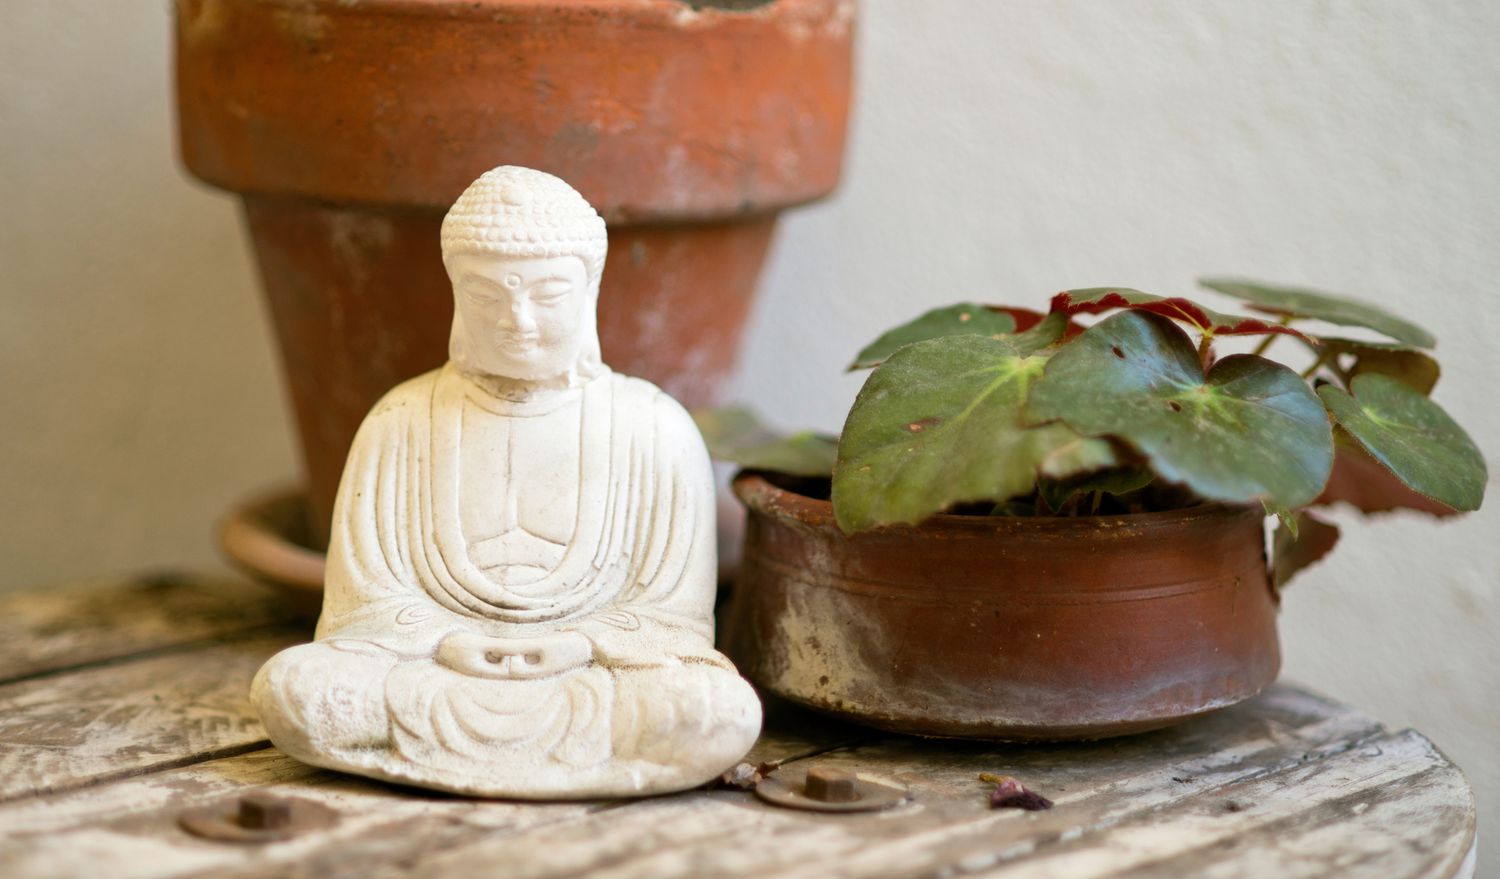 Buddha statue and plant on a table